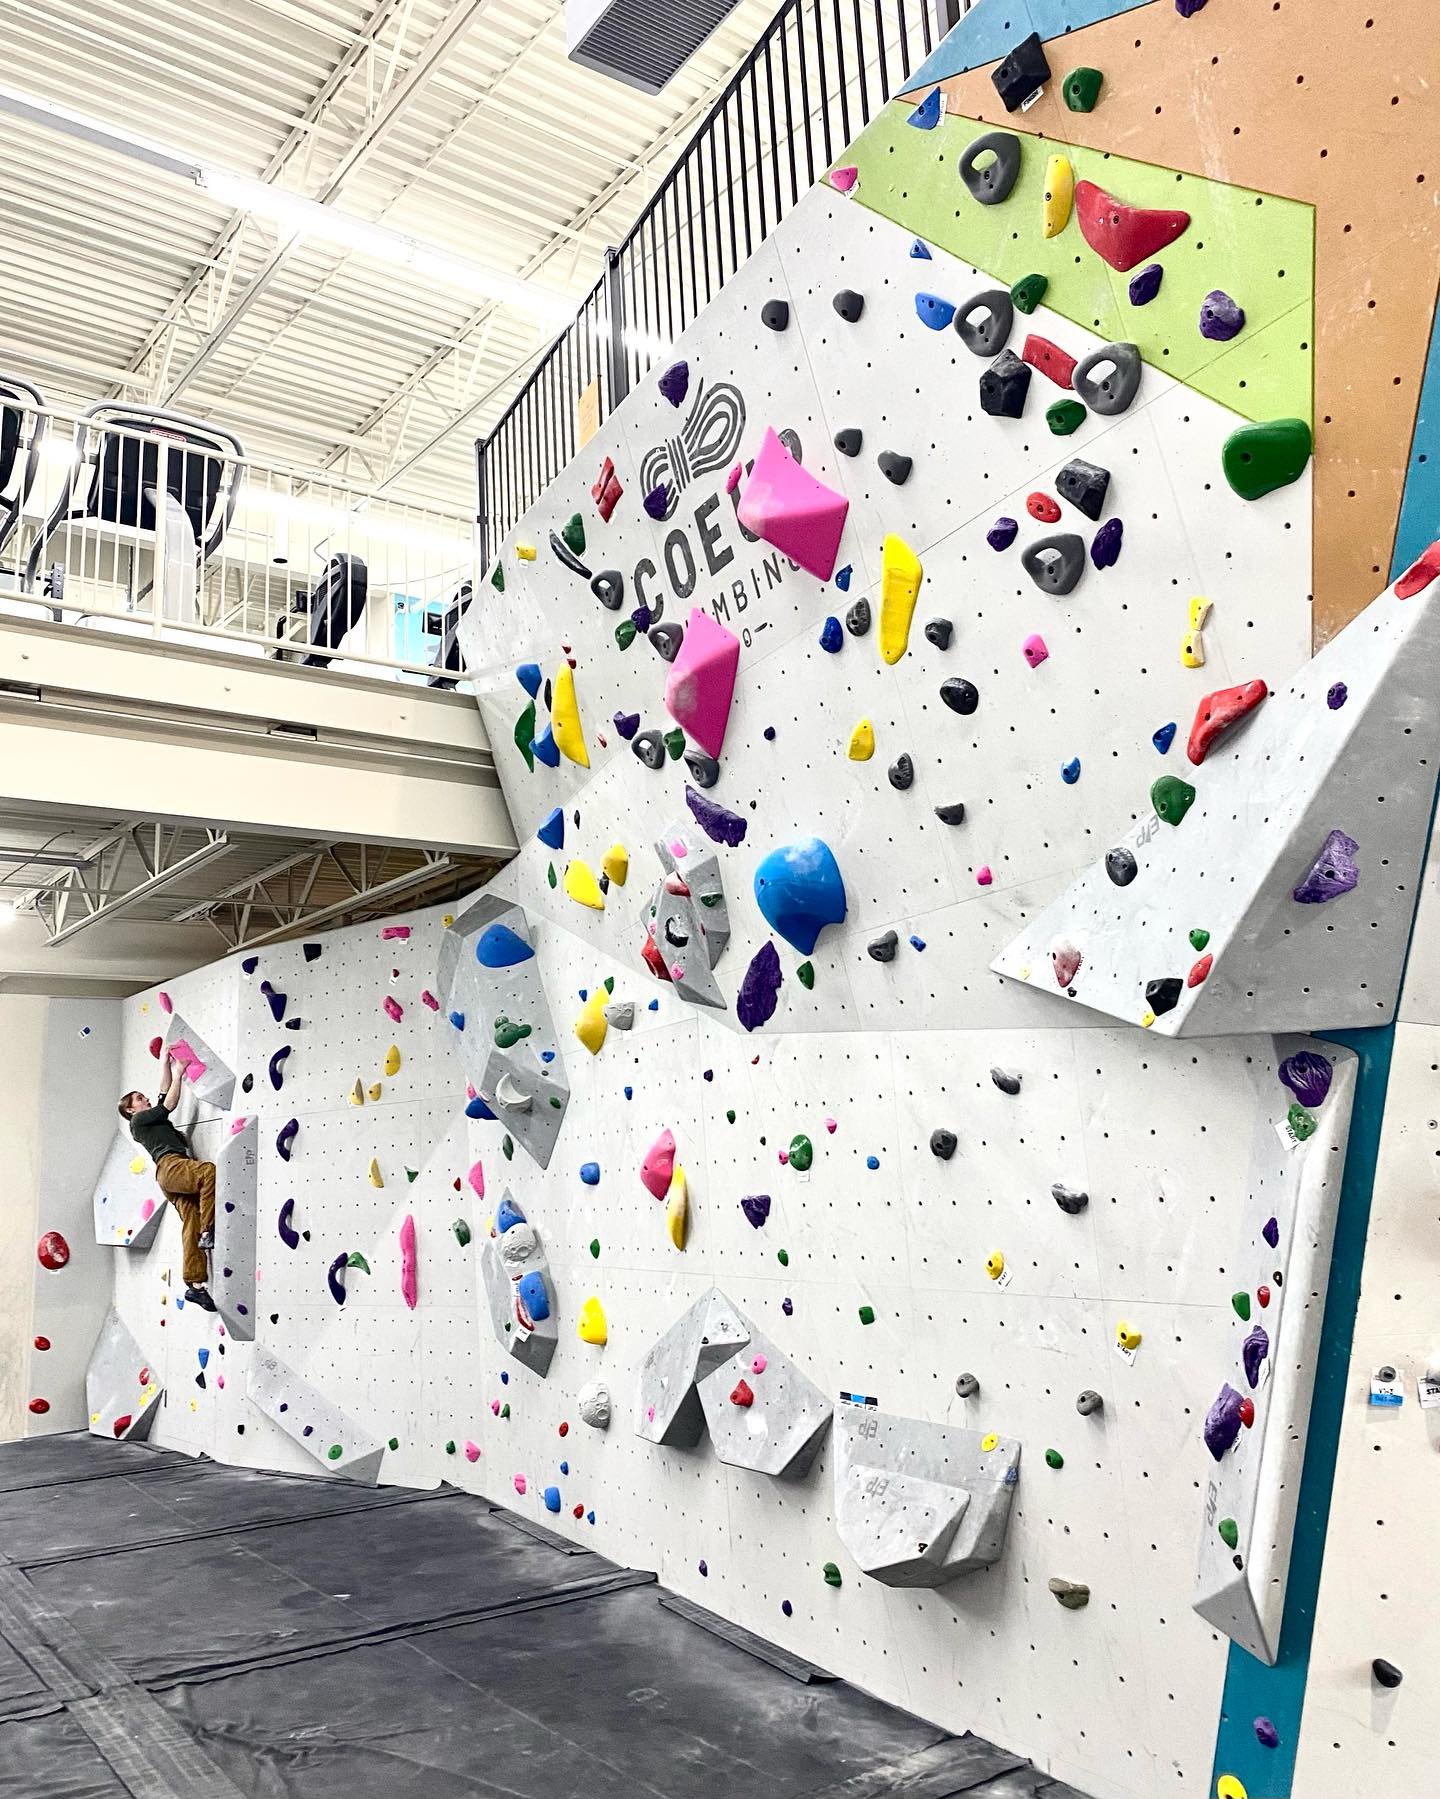 New boulders are up! Check them out and let us know what you think!